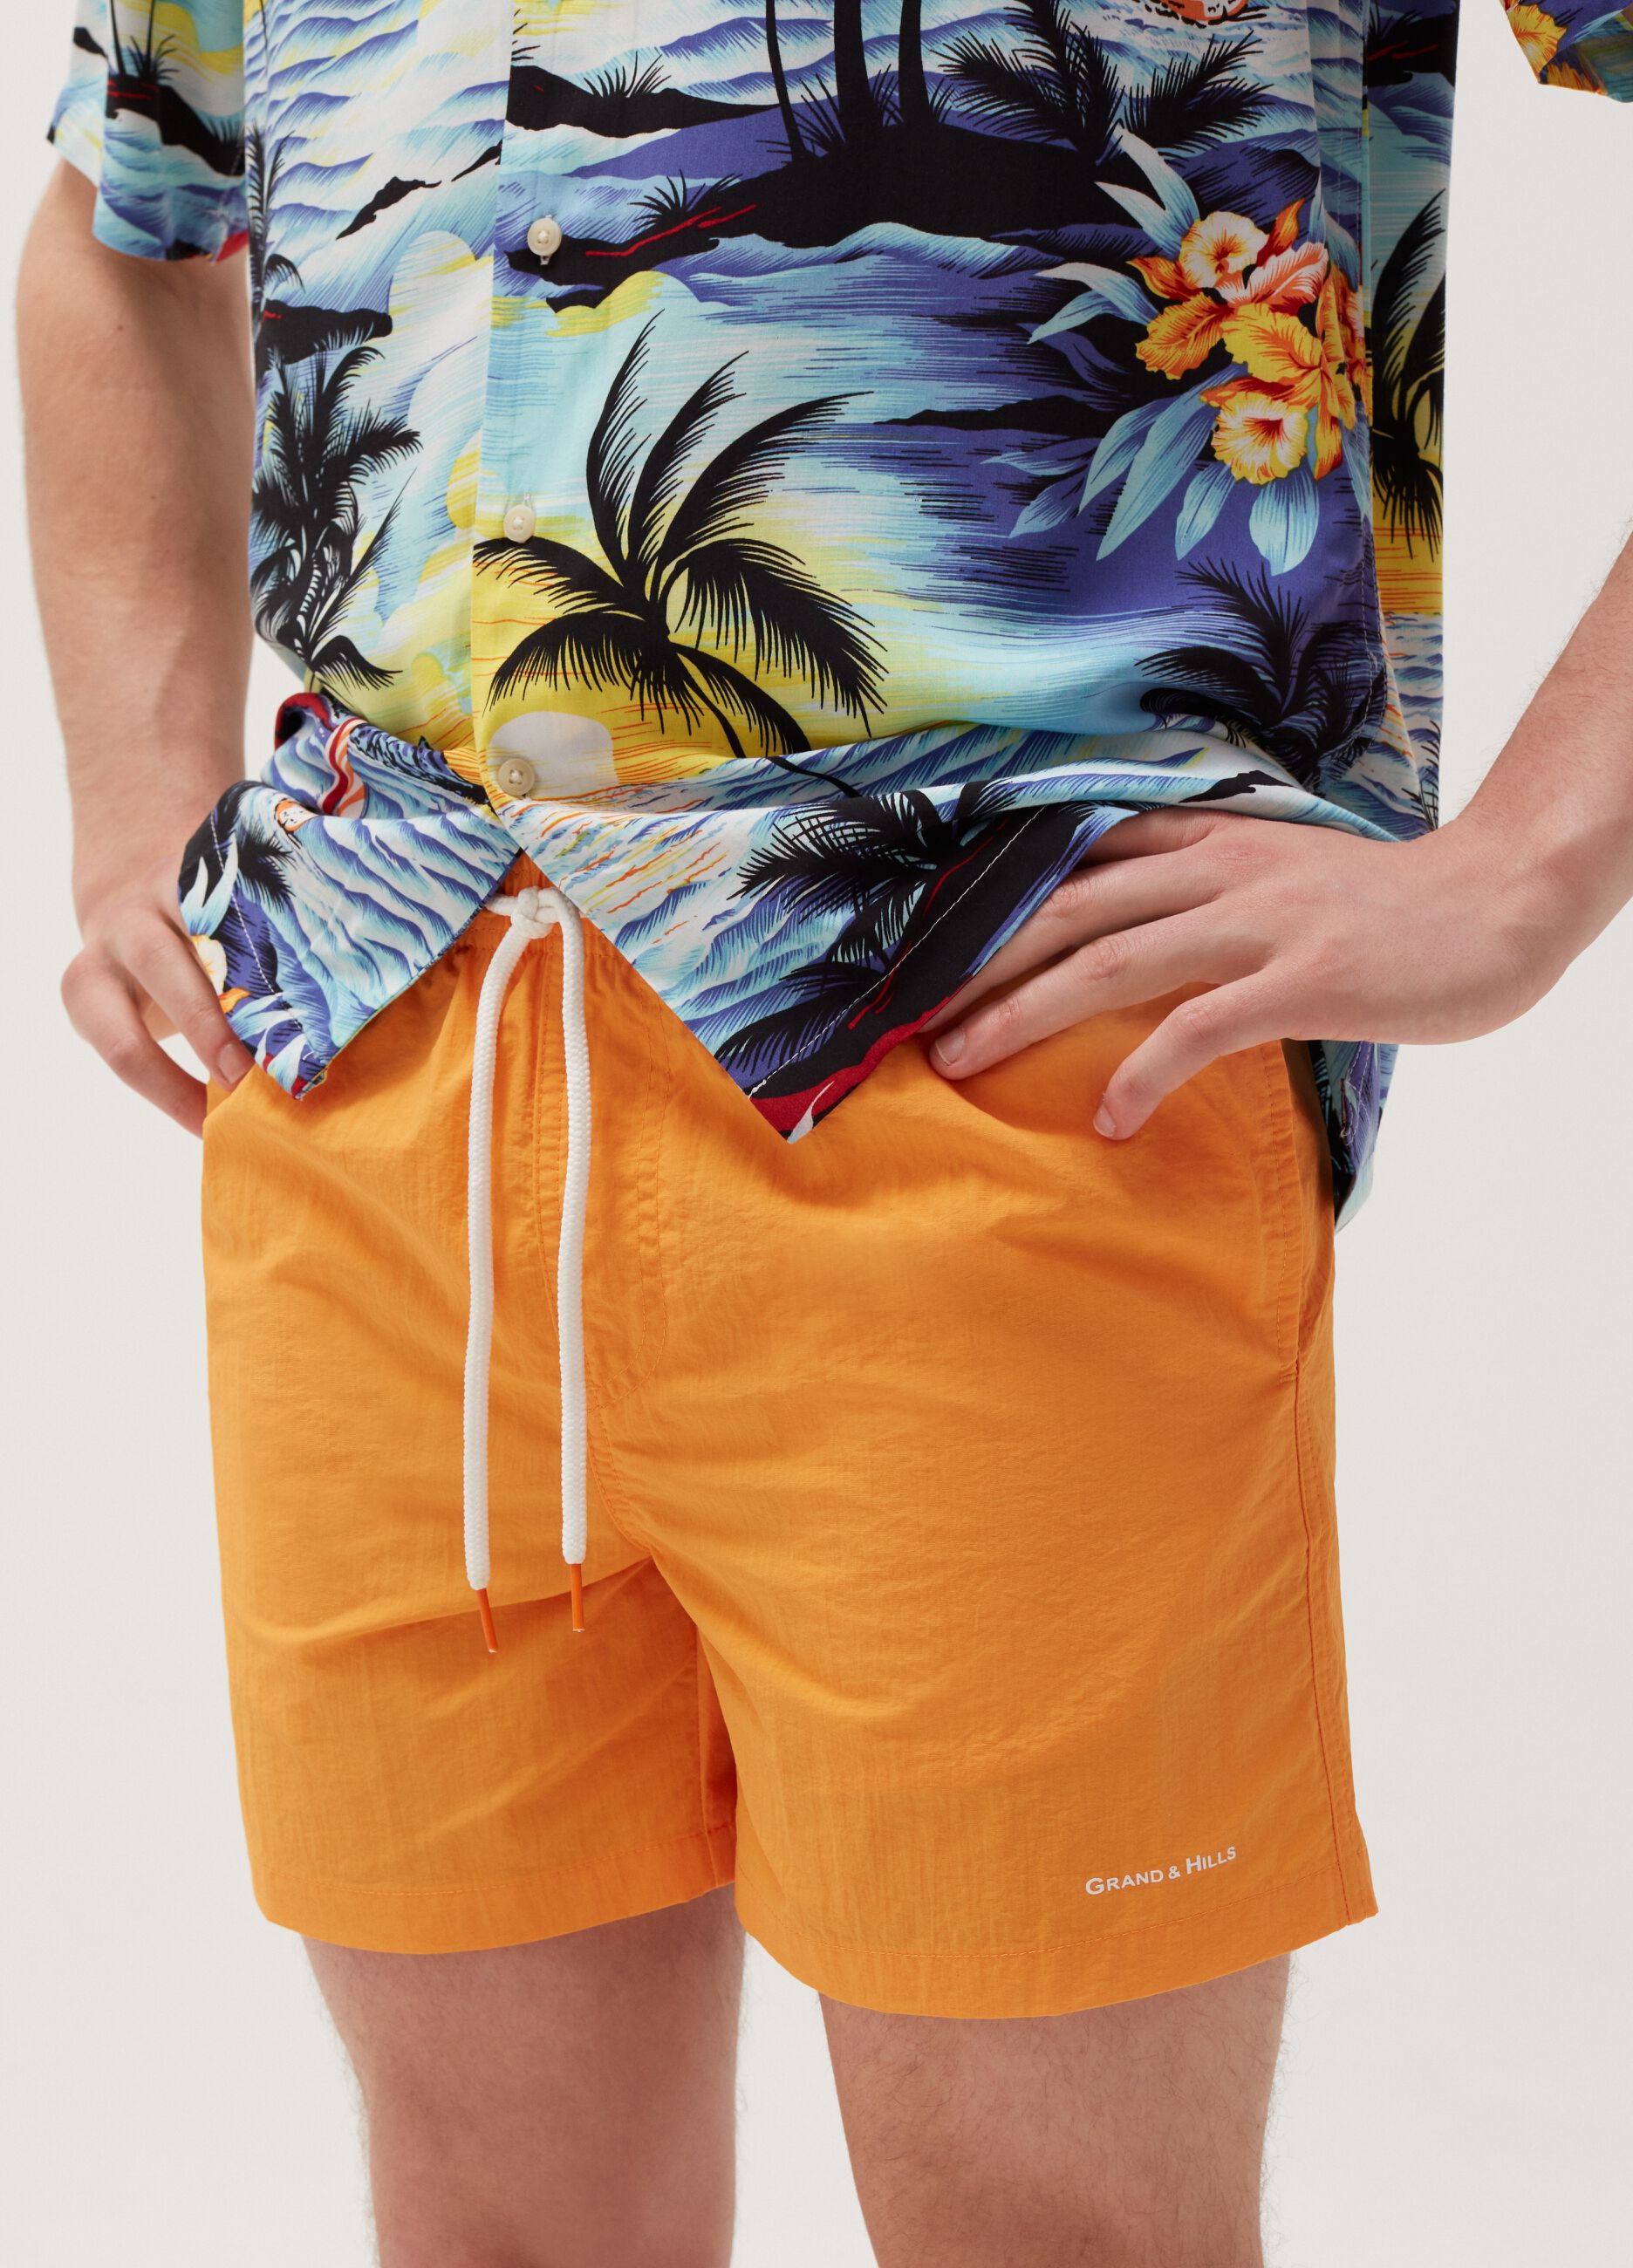 Swimming trunks with logo print